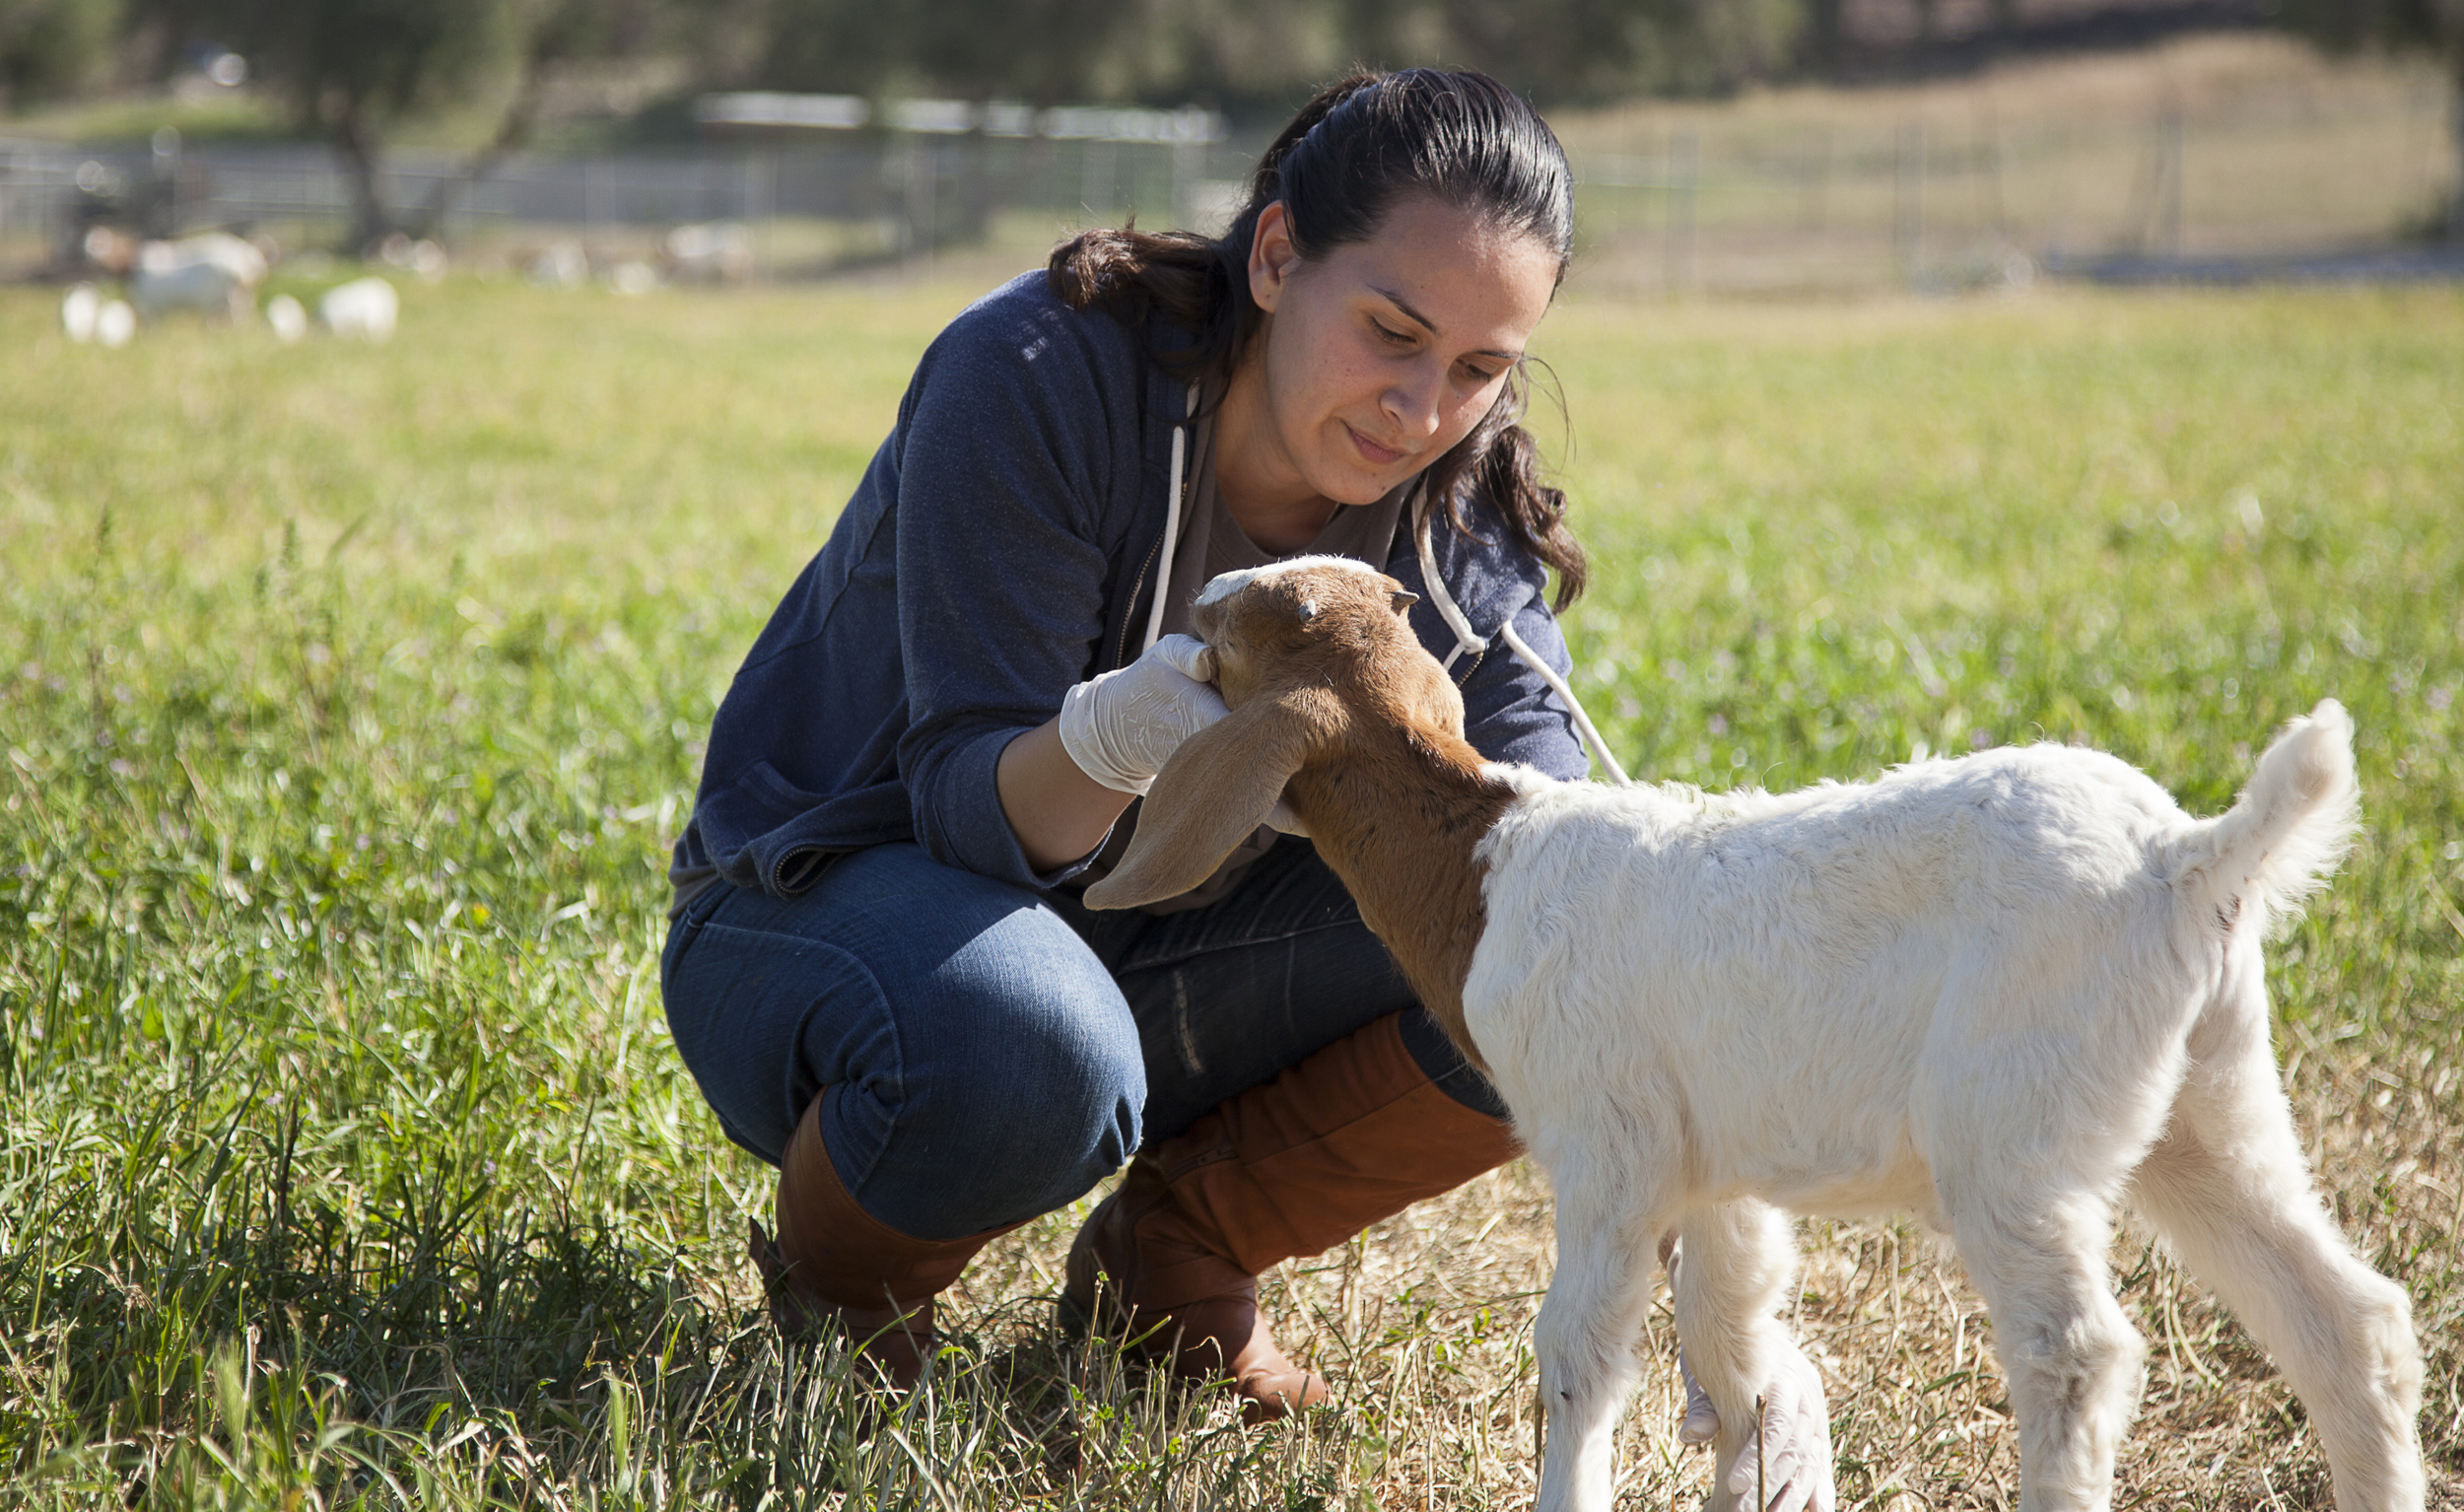  Georgina Martinez checks the ears of a baby goat at the Pierce farm on Friday, March 20, 2015. Woodland Hills, Calif.  Read the full story&nbsp; here  